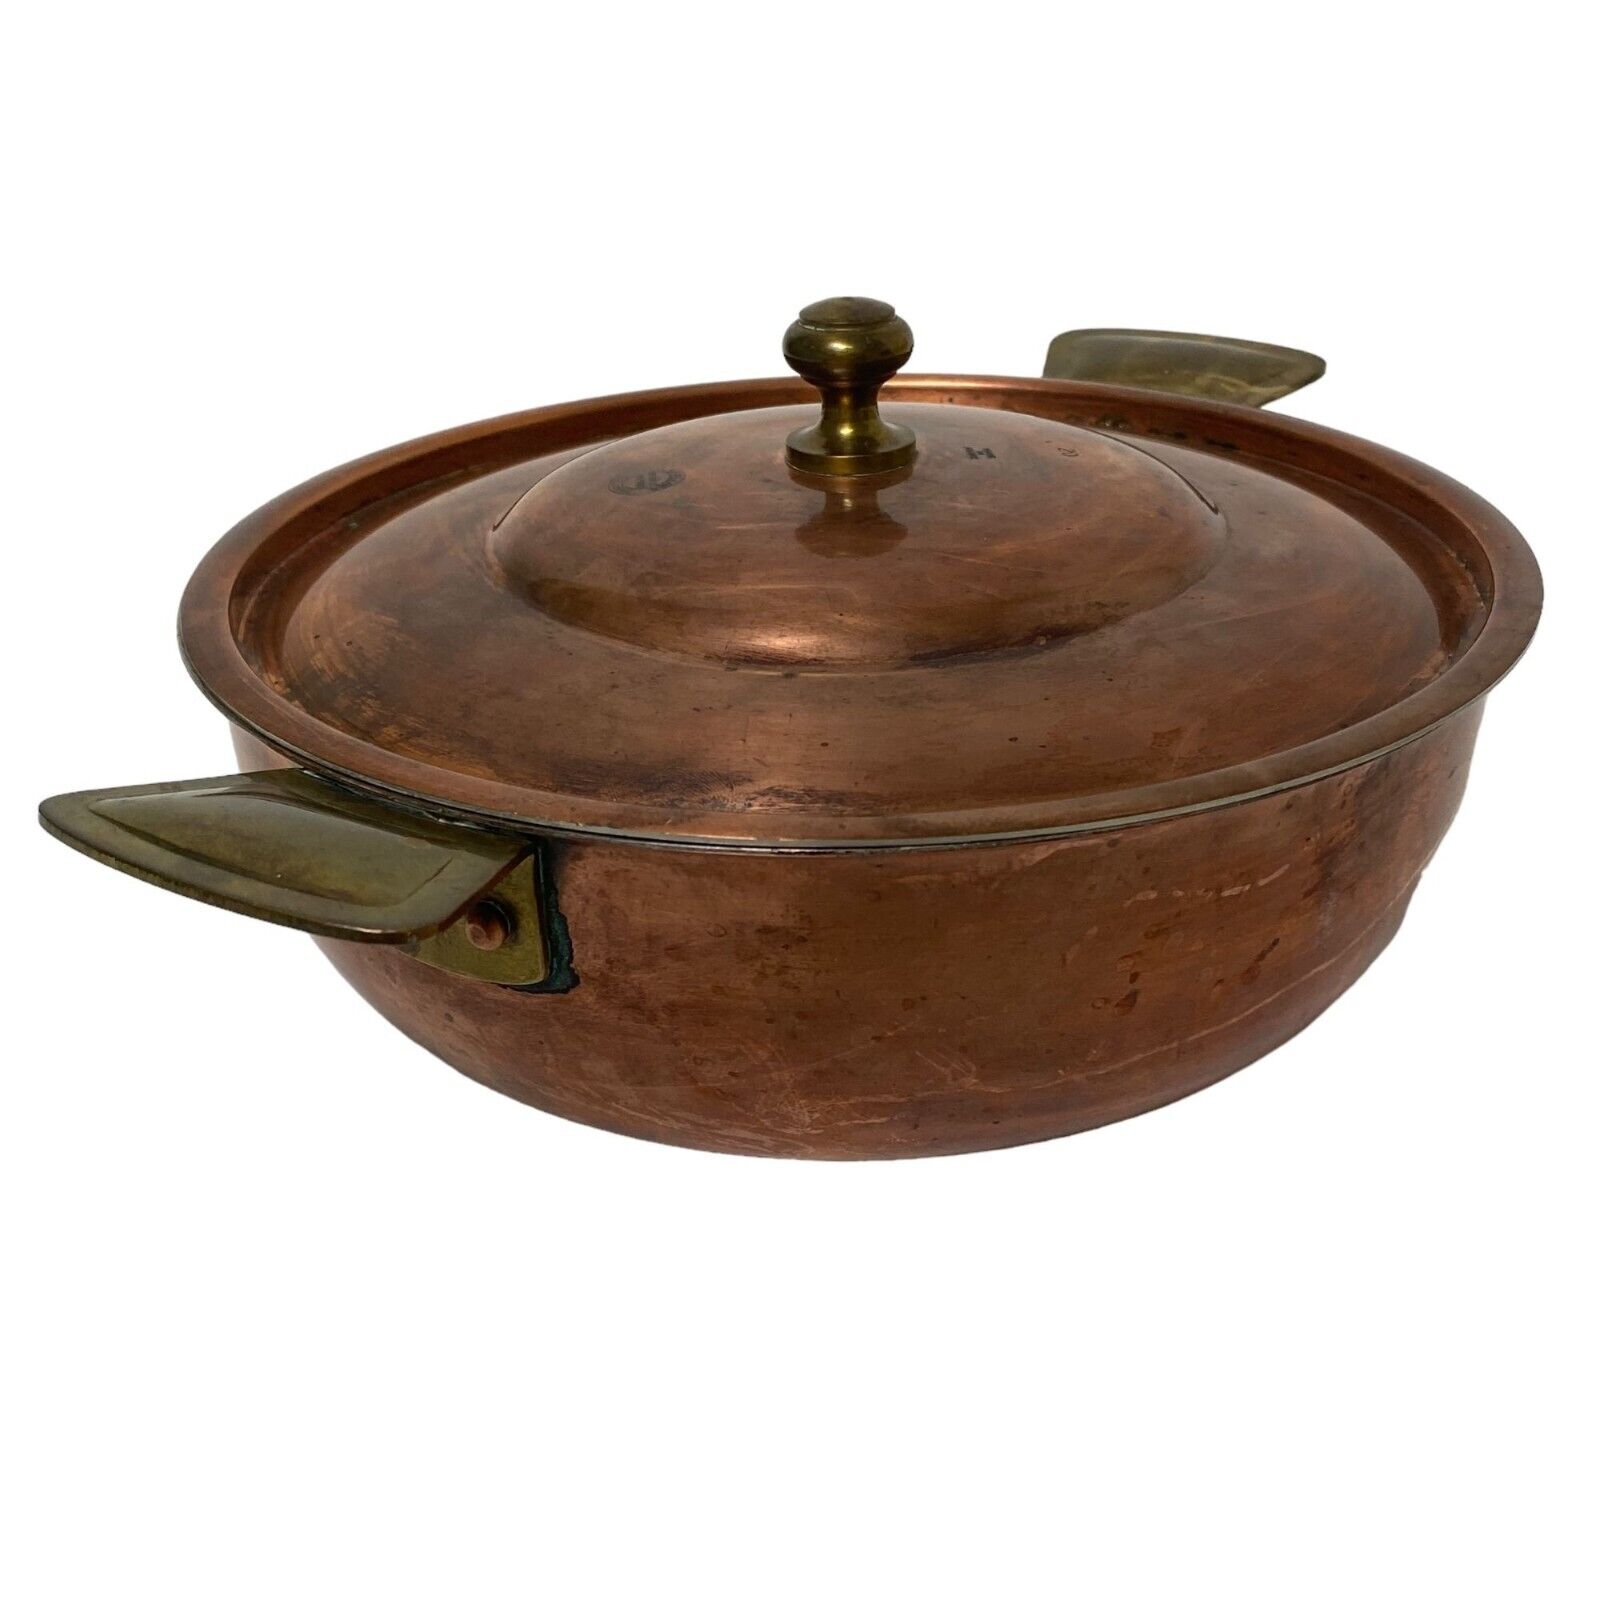 L. LECELLIER VILLEDIEU French Copper Pot Made in France Casserole with Lid 1.5QT